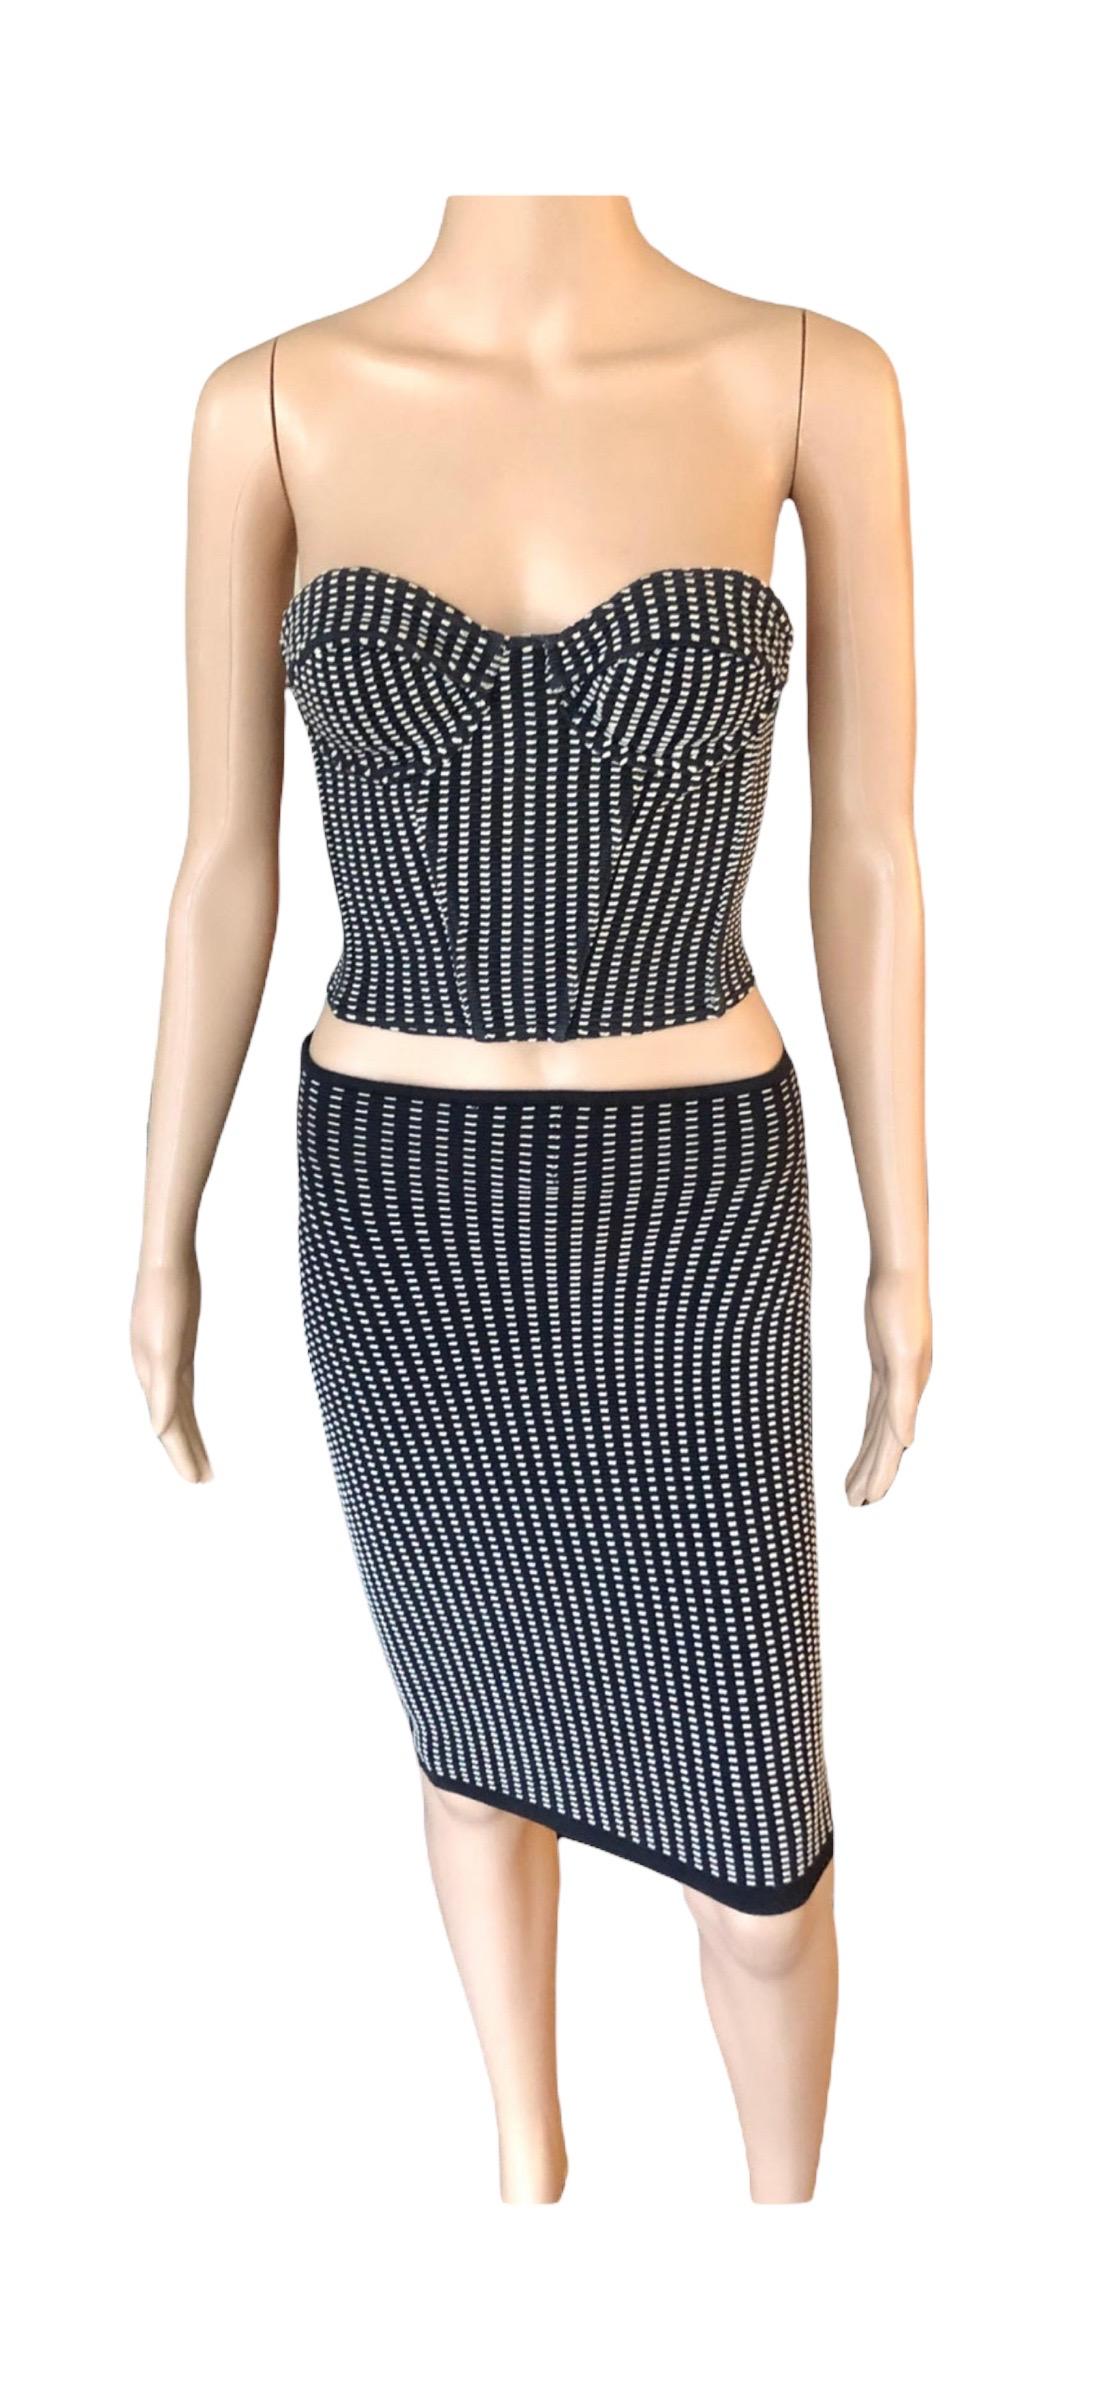 Azzedine Alaia S/S 1991 Vintage Skirt and Bustier Crop Top 2 Piece Set  6